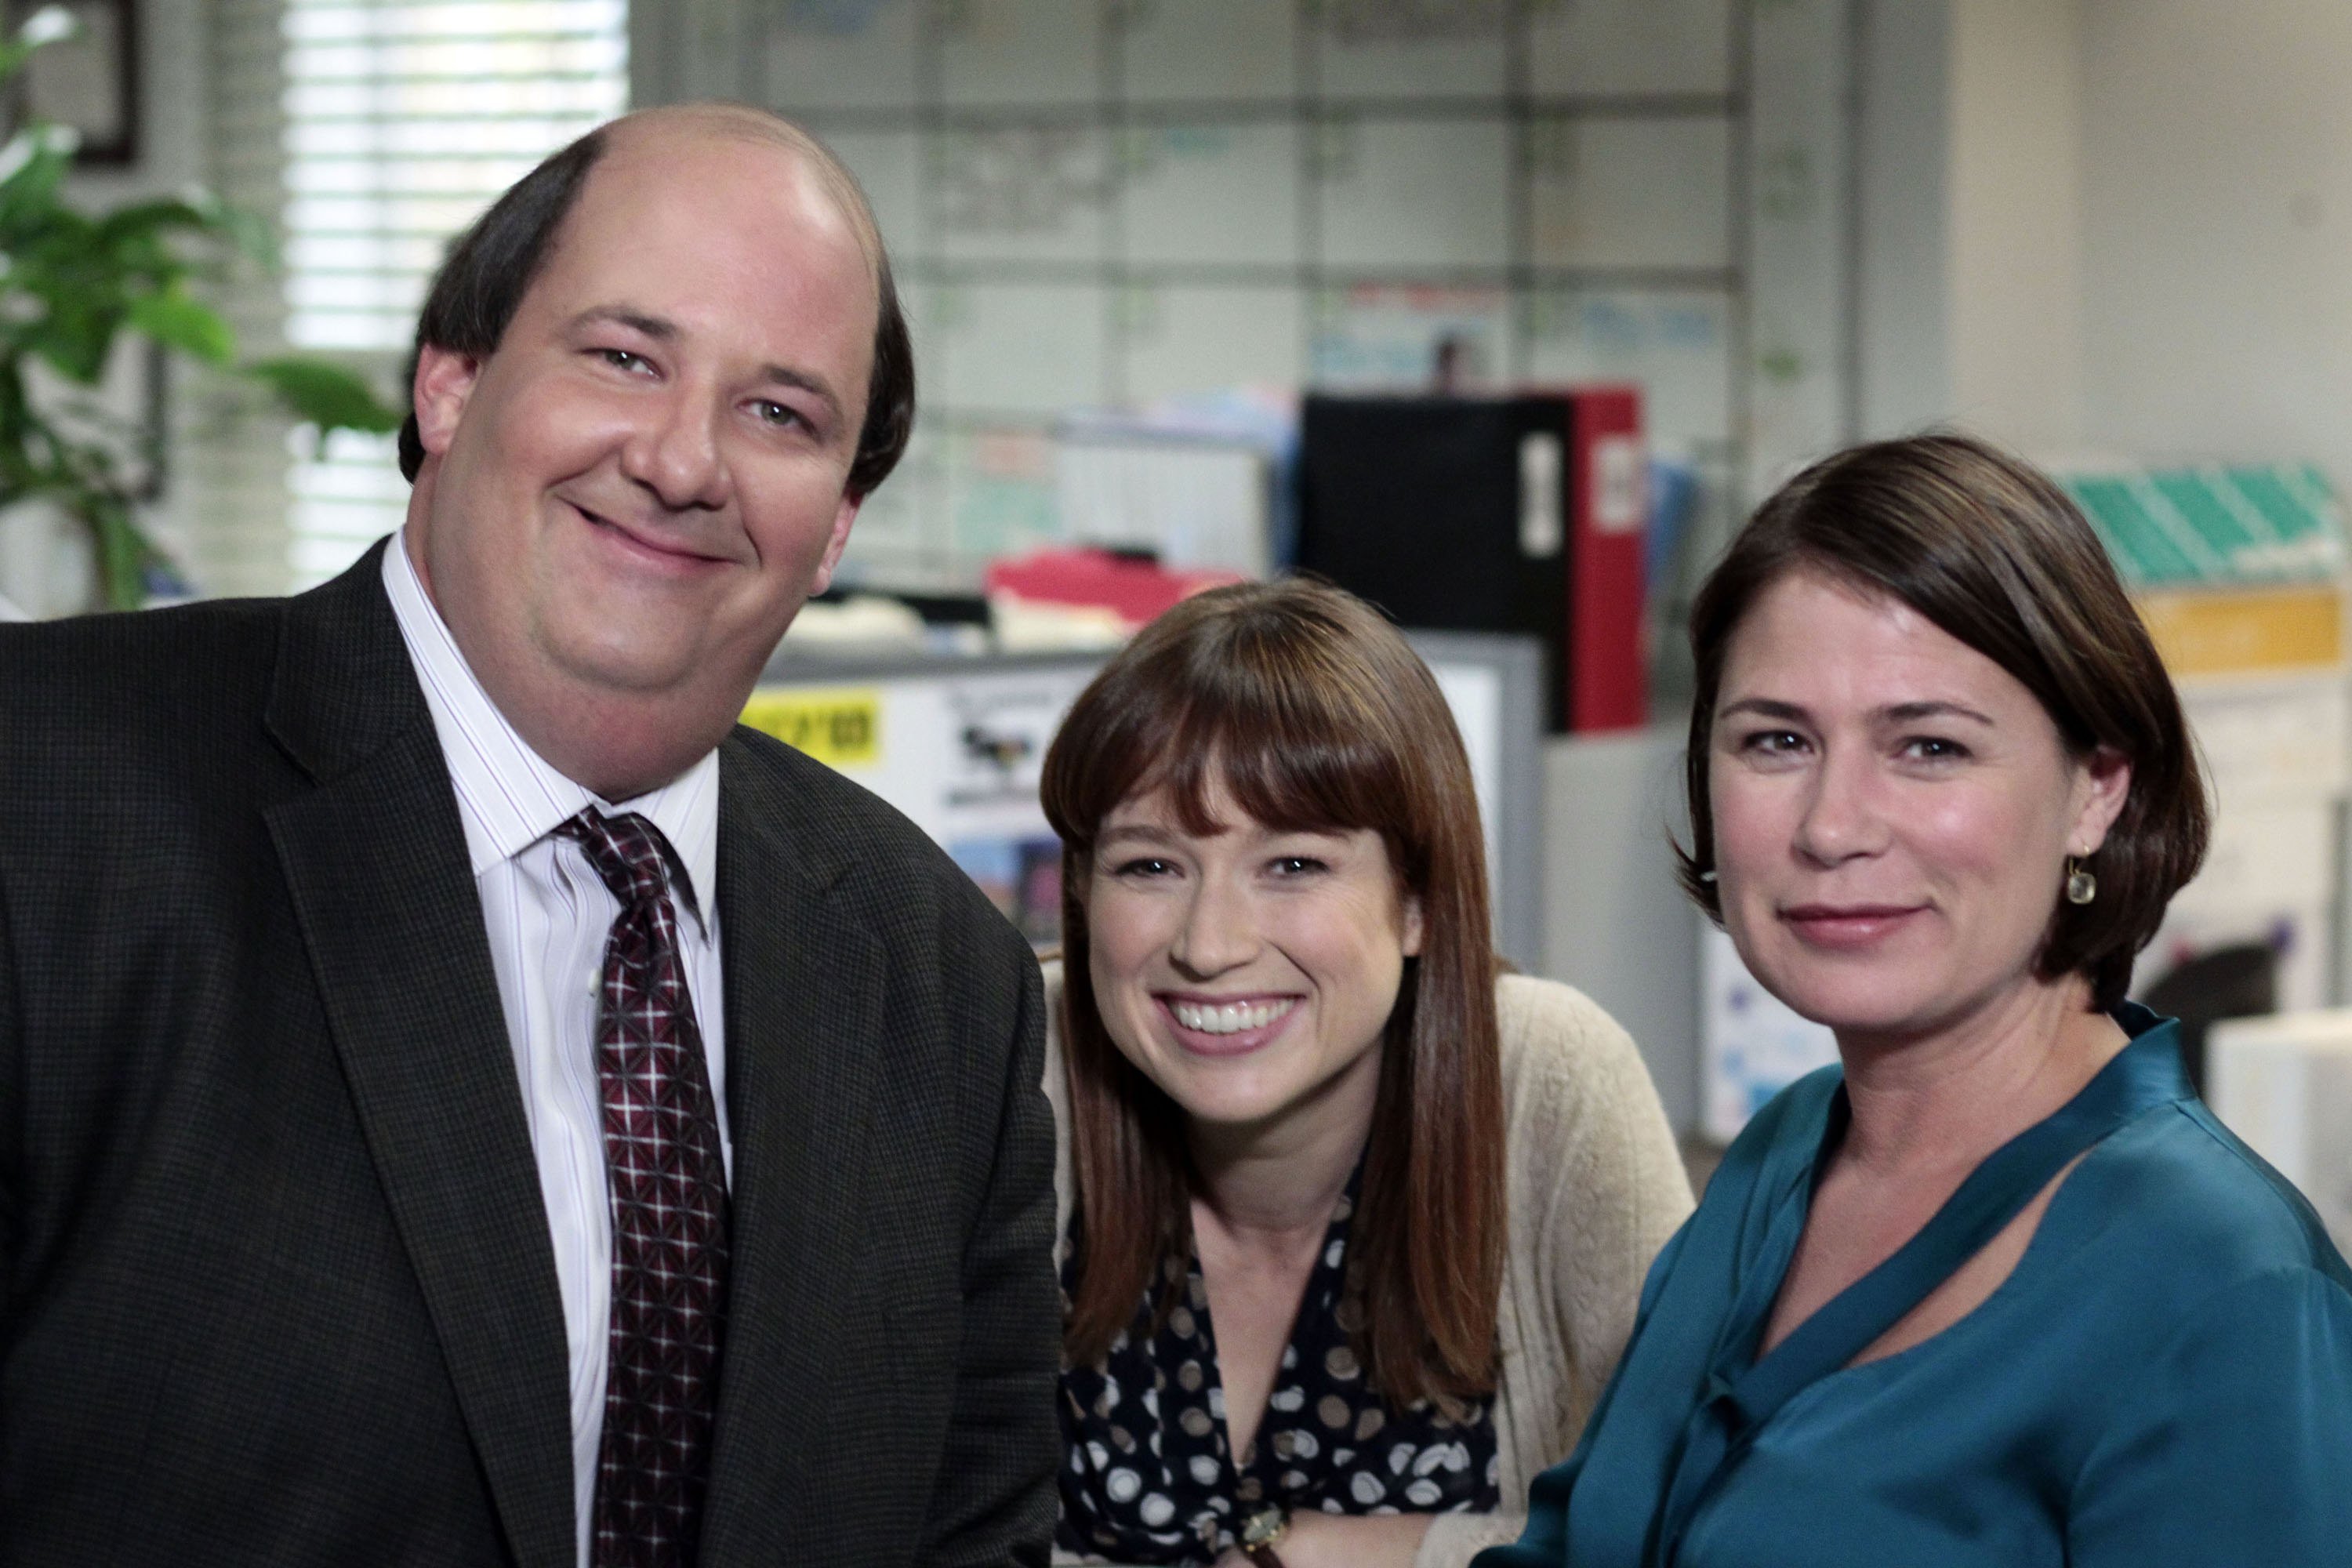 Brian Baumgartner as Kevin Malone, Ellie Kemper as Kelly Erin Hannon, Maura Tierney as Susan California on the set of The Office